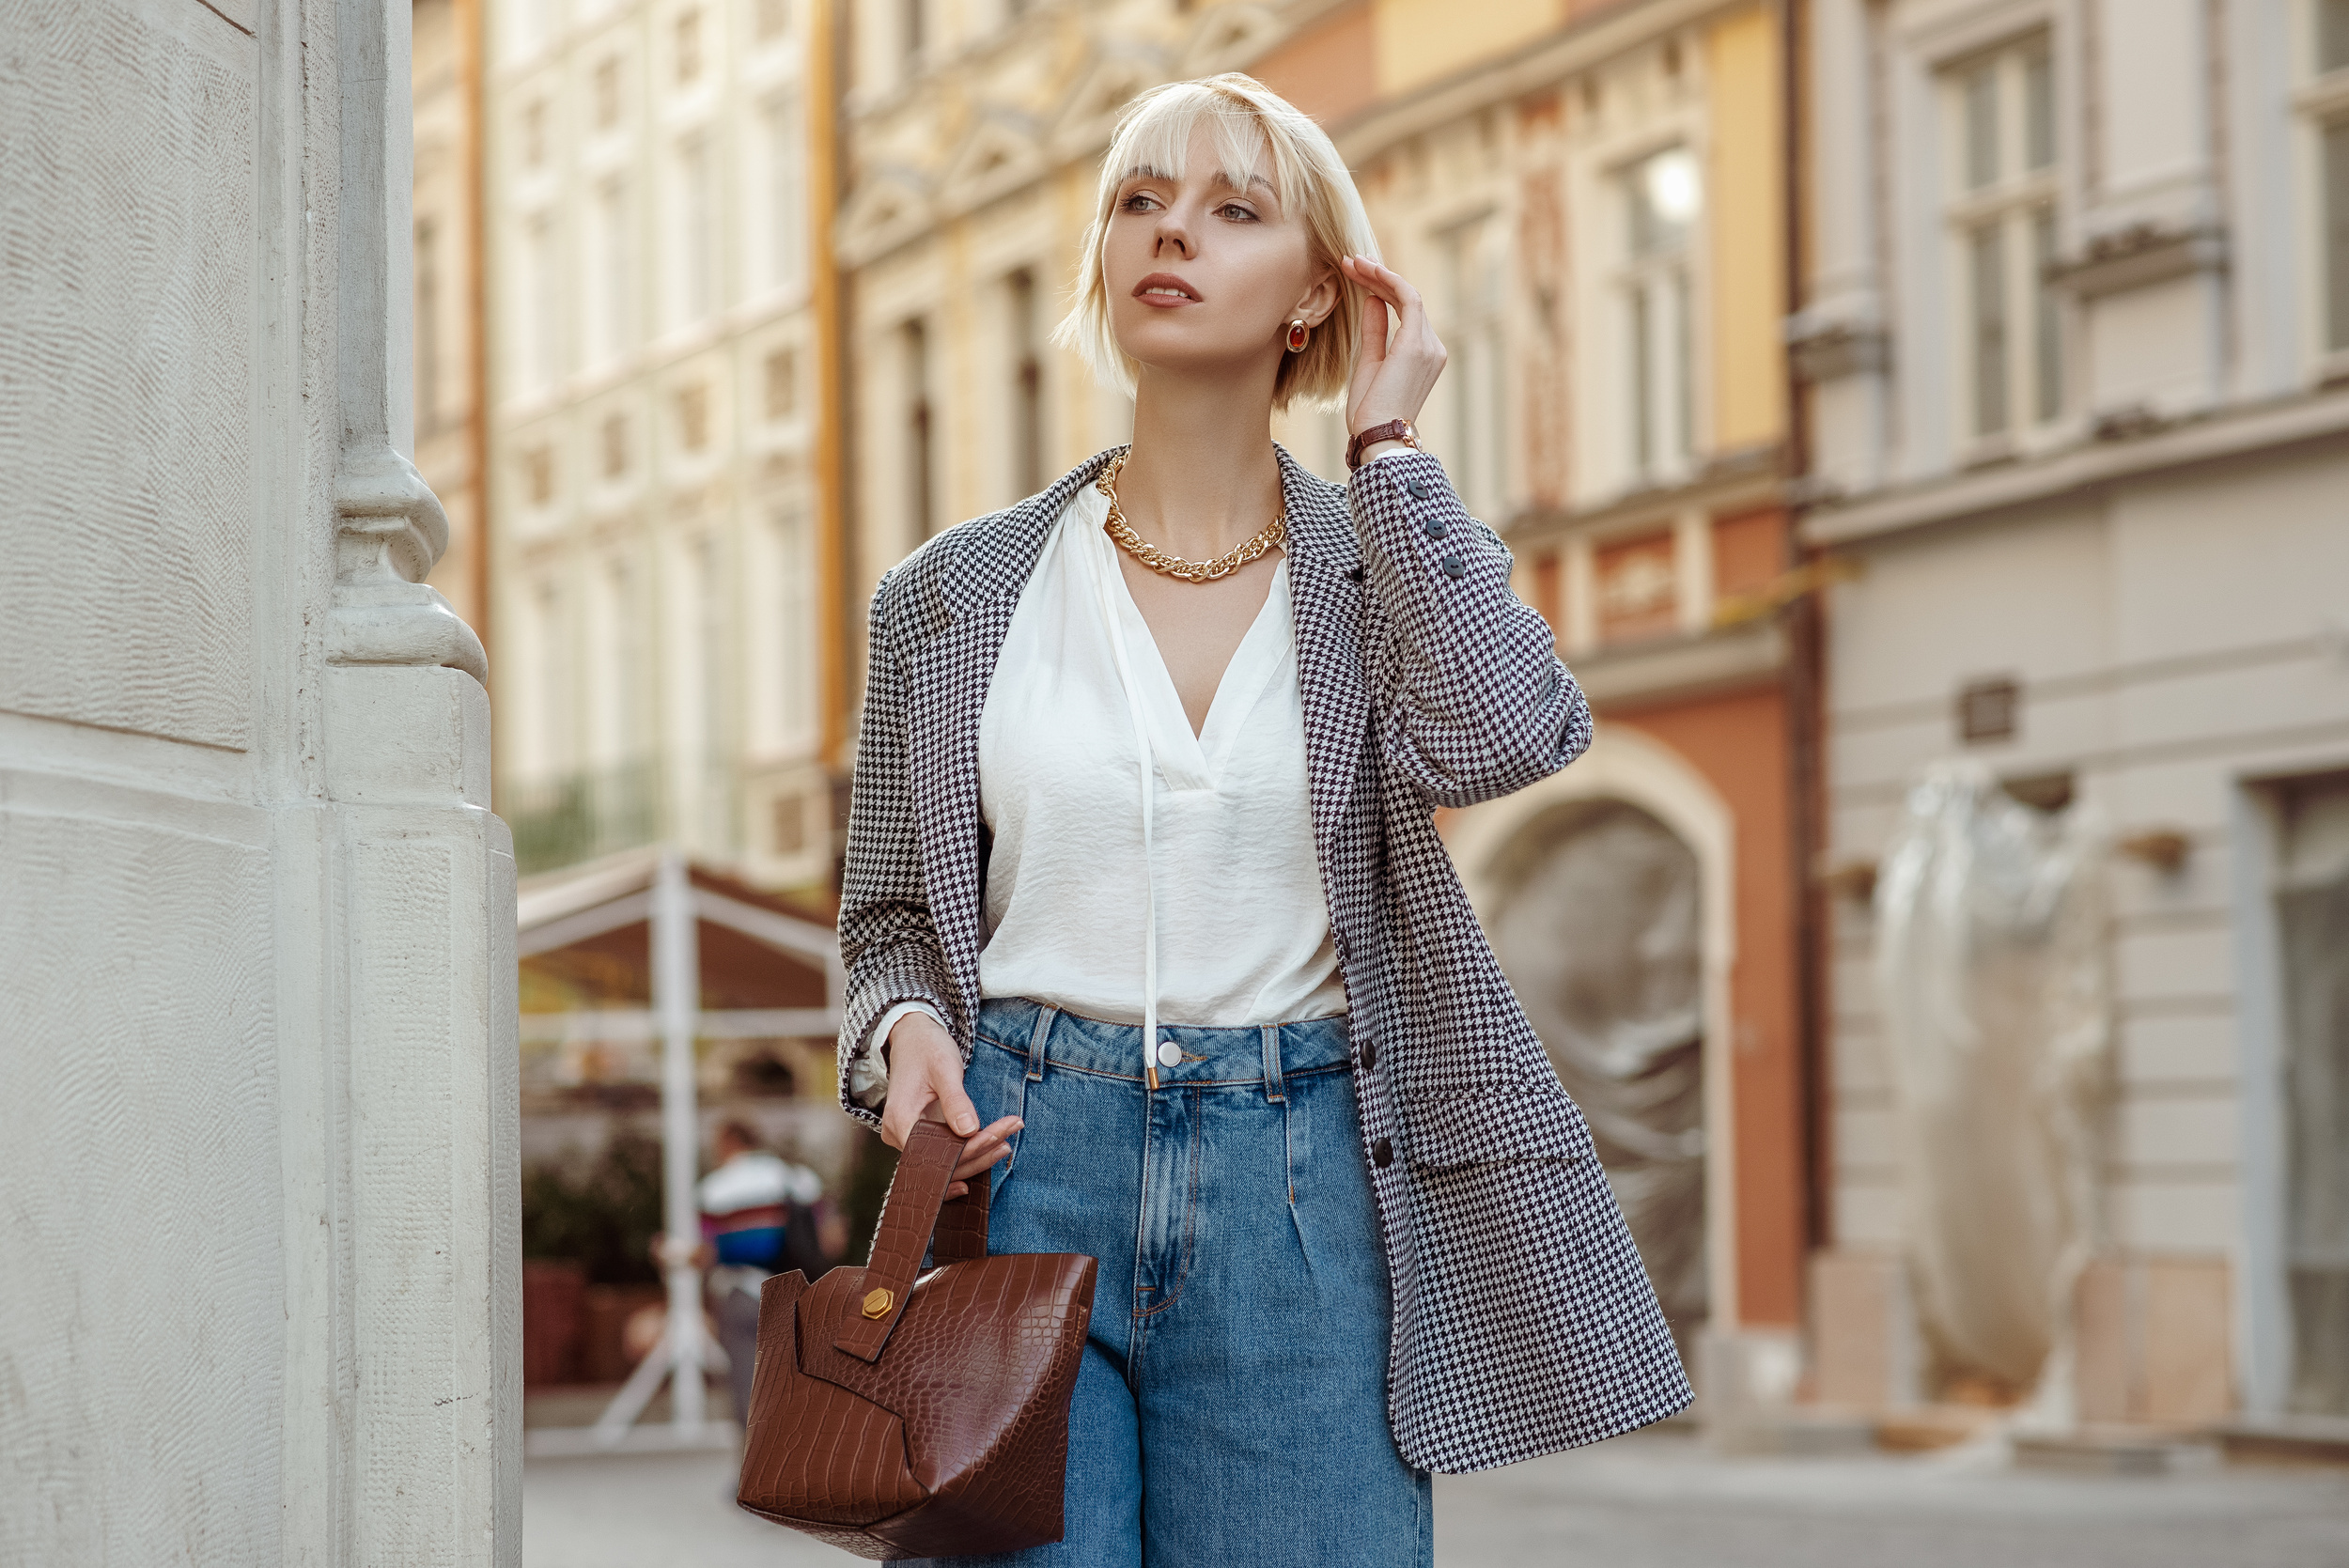 <p>Blazers are great layering pieces when the weather starts getting a bit warmer. If you’re ready to break out your lightweight T-shirts and light-washed denim, a blazer is perfect to toss on top to make the look seasonally appropriate. </p><p><a href='https://www.msn.com/en-us/community/channel/vid-cj9pqbr0vn9in2b6ddcd8sfgpfq6x6utp44fssrv6mc2gtybw0us'>Follow us on MSN to see more of our exclusive lifestyle content.</a></p>